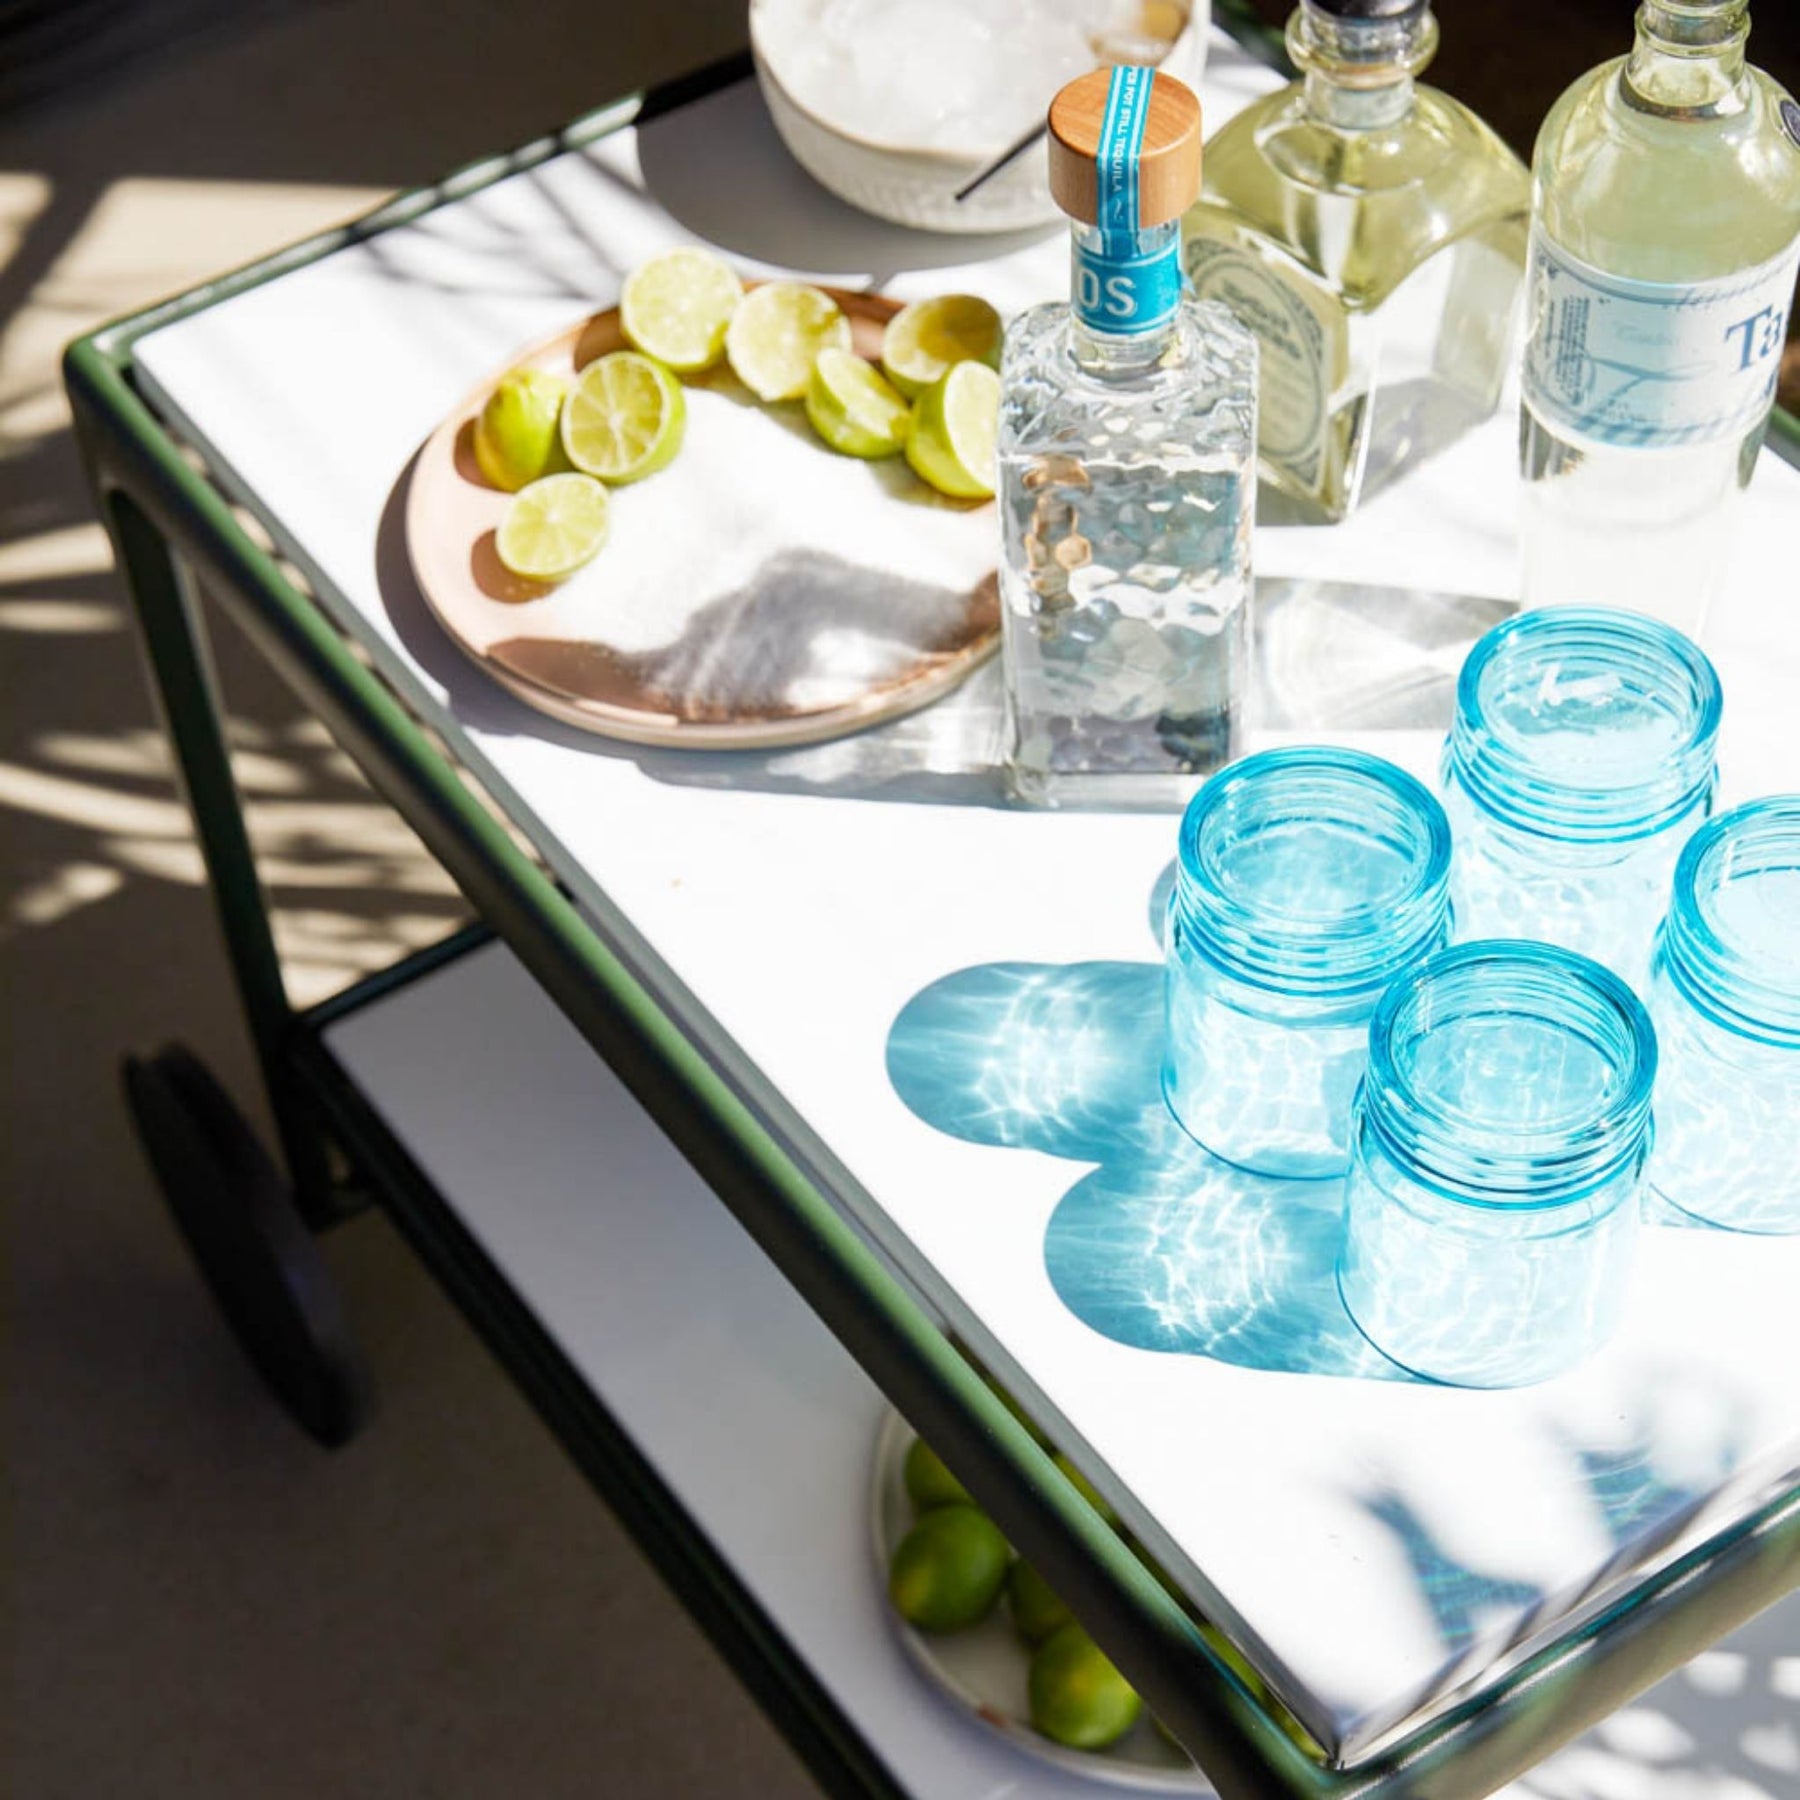 Knoll Richard Schultz 1966 Serving Cart Outdoors with Cocktails and Limes